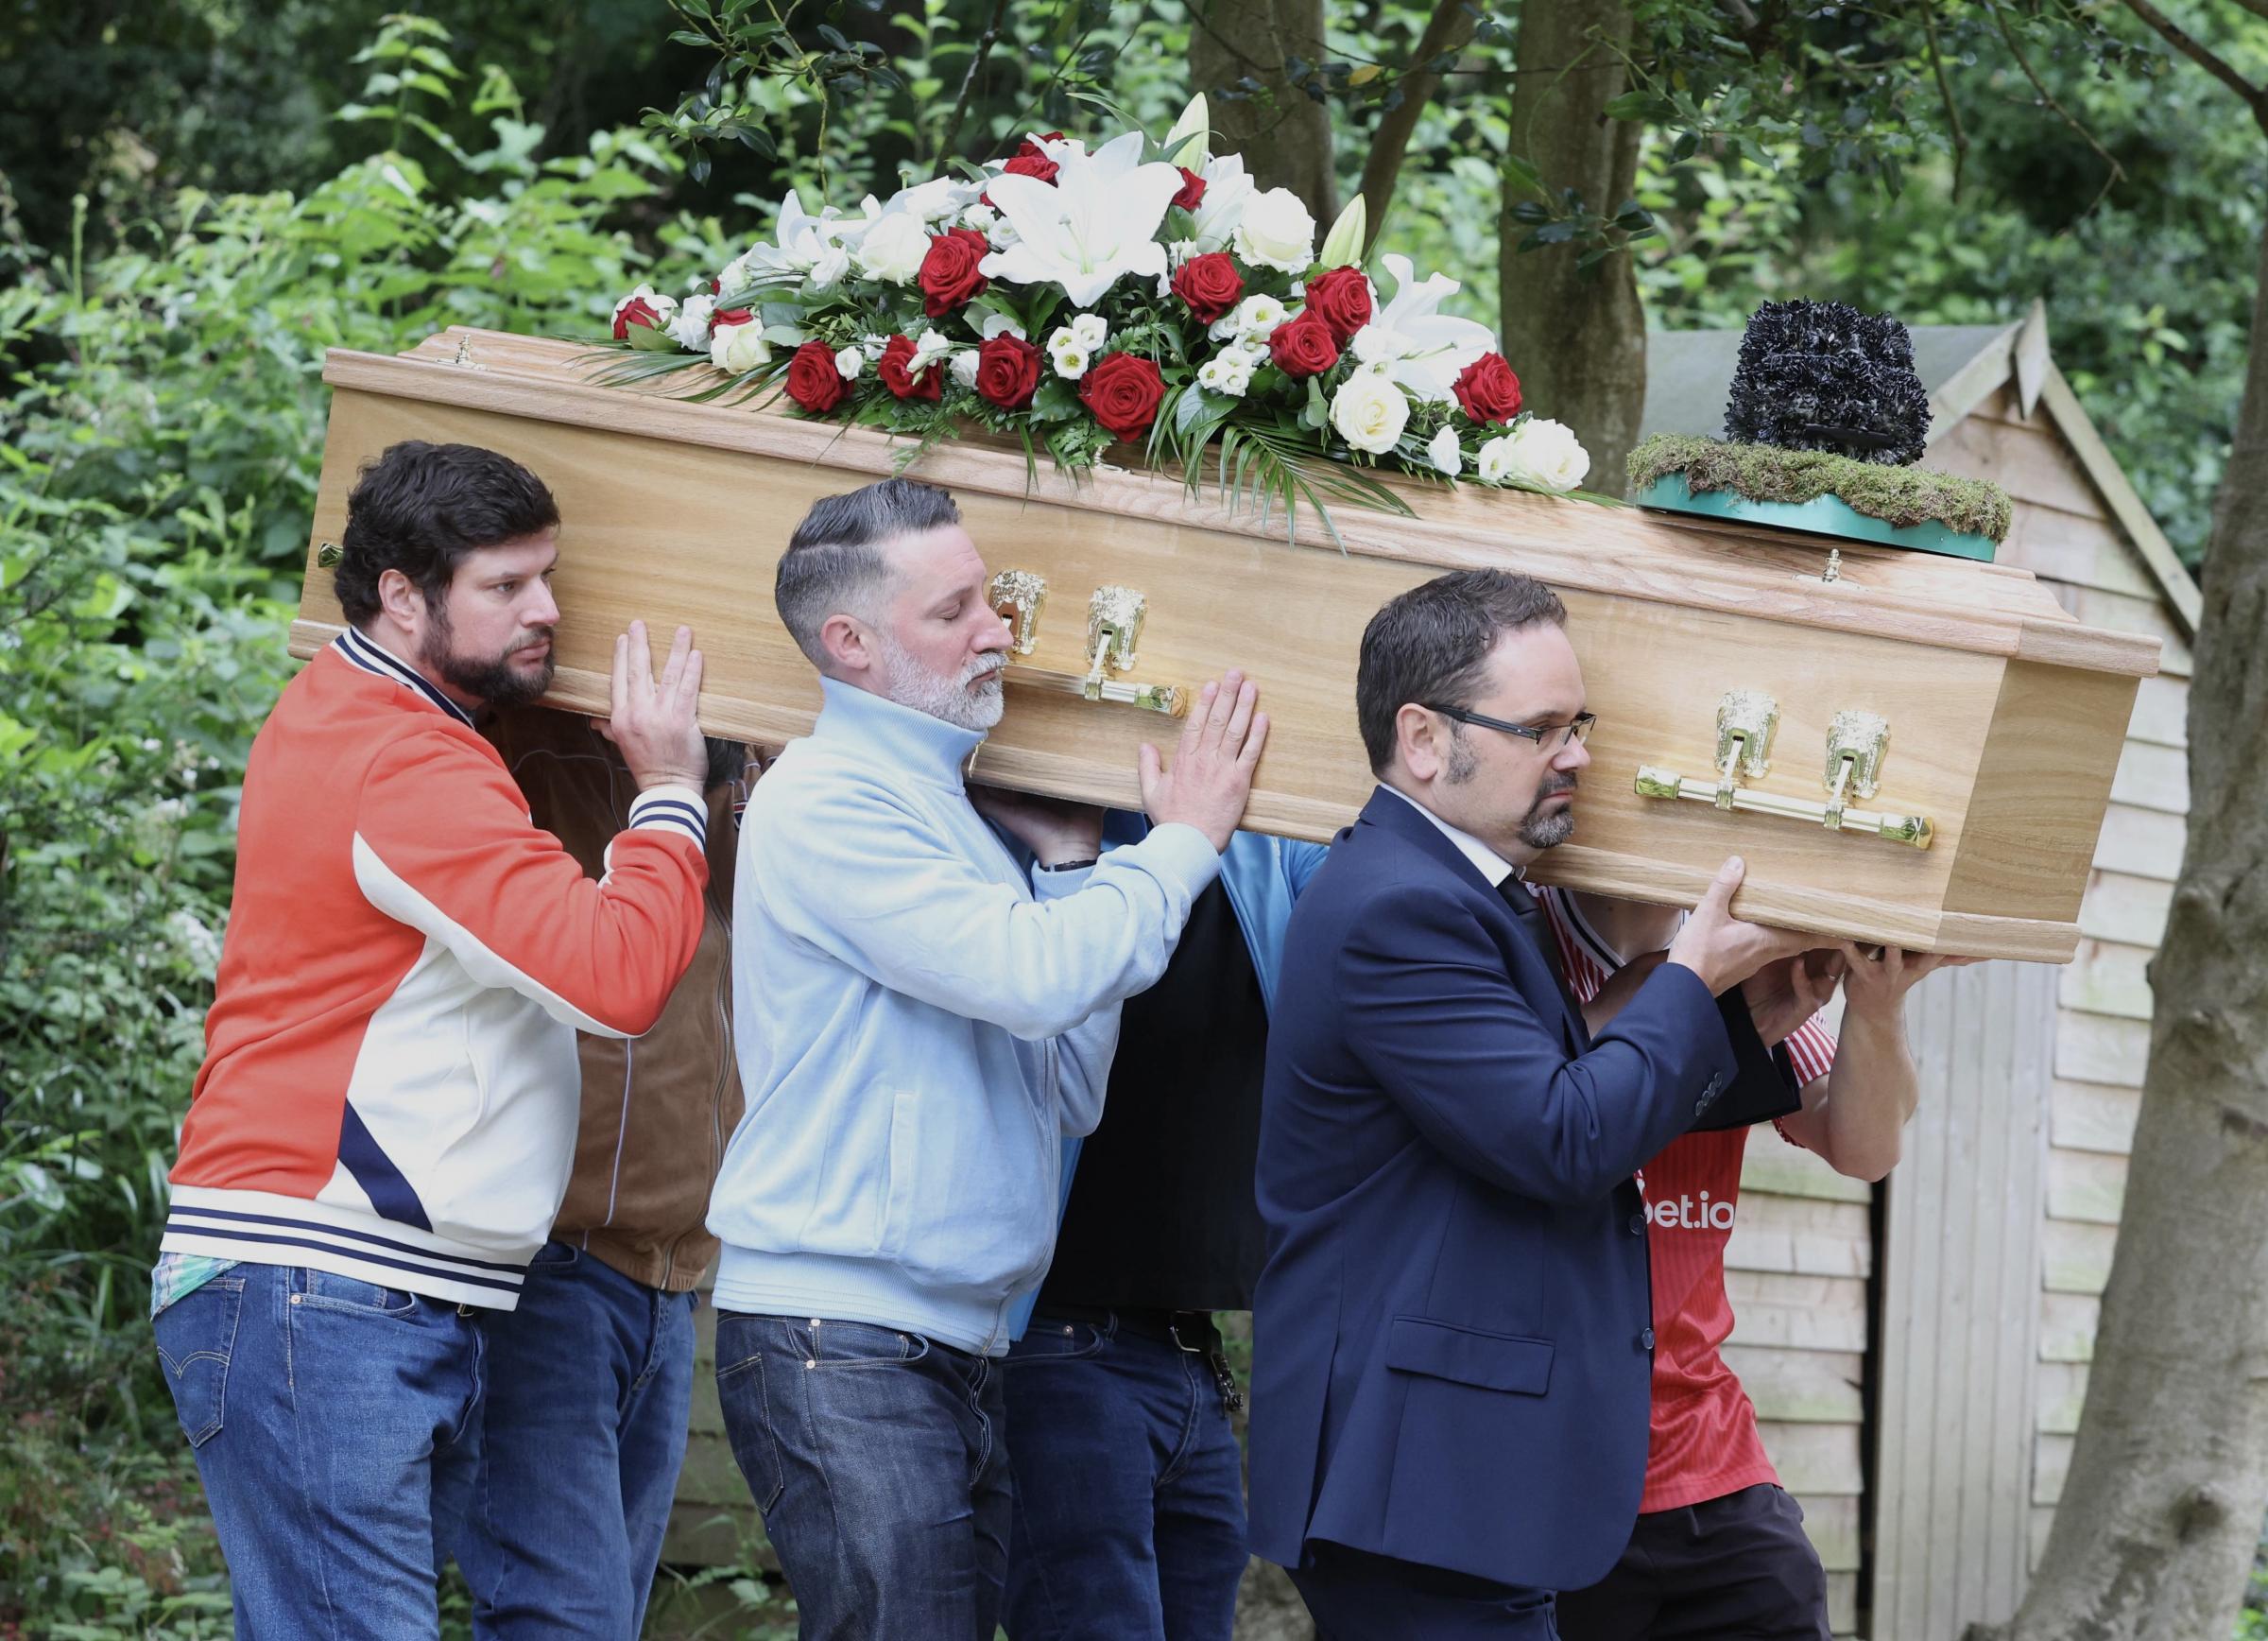 Funeral of young referee Elijah Khaira who died aged 20